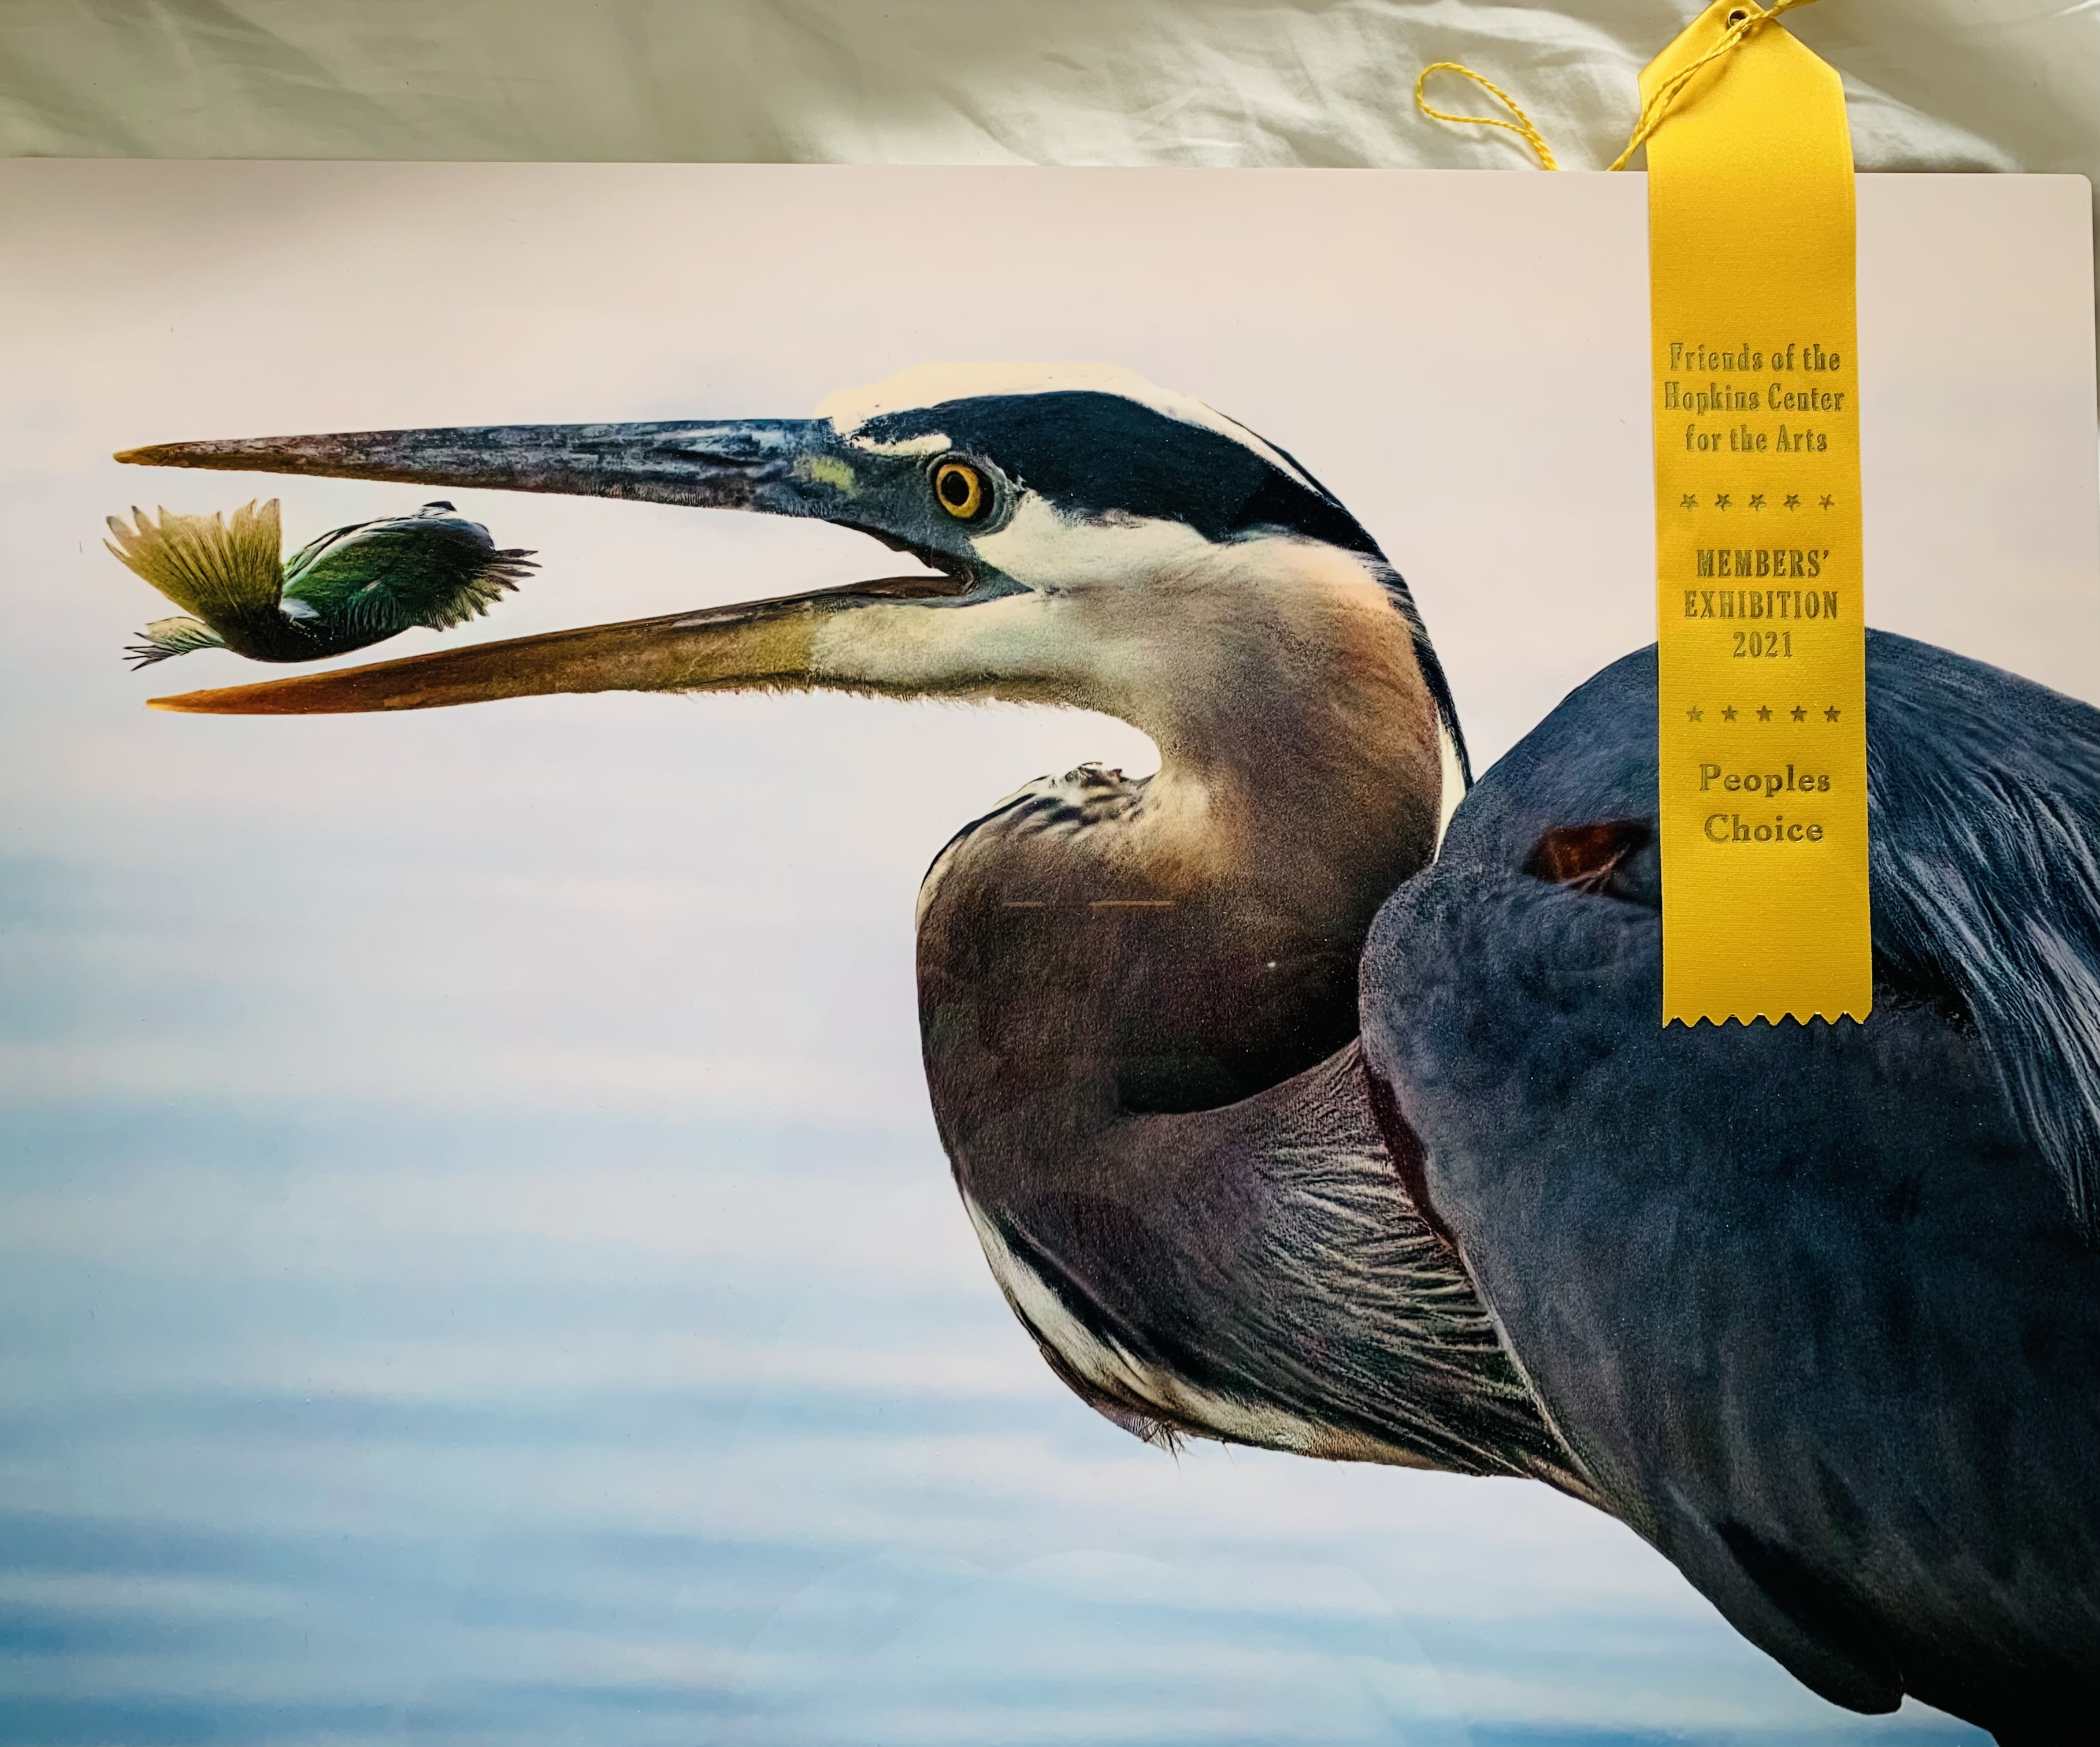 Great Blue Heron Picture at Hopkins Arts Center Exhibits and Won the People Choice Award.